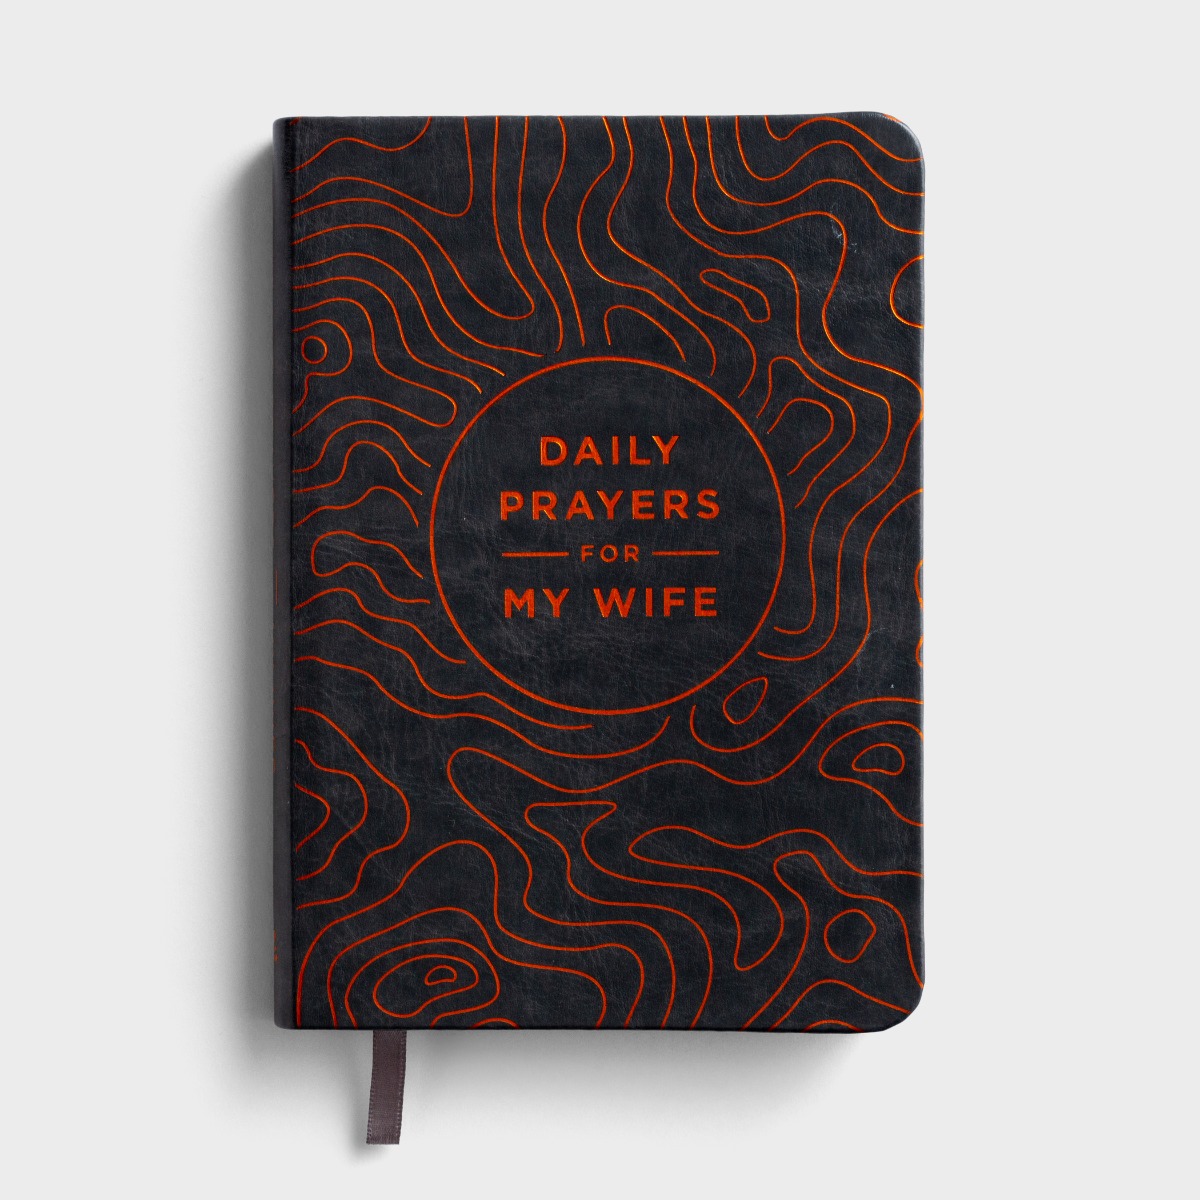 Daily Prayers for My Wife - Devotional Book